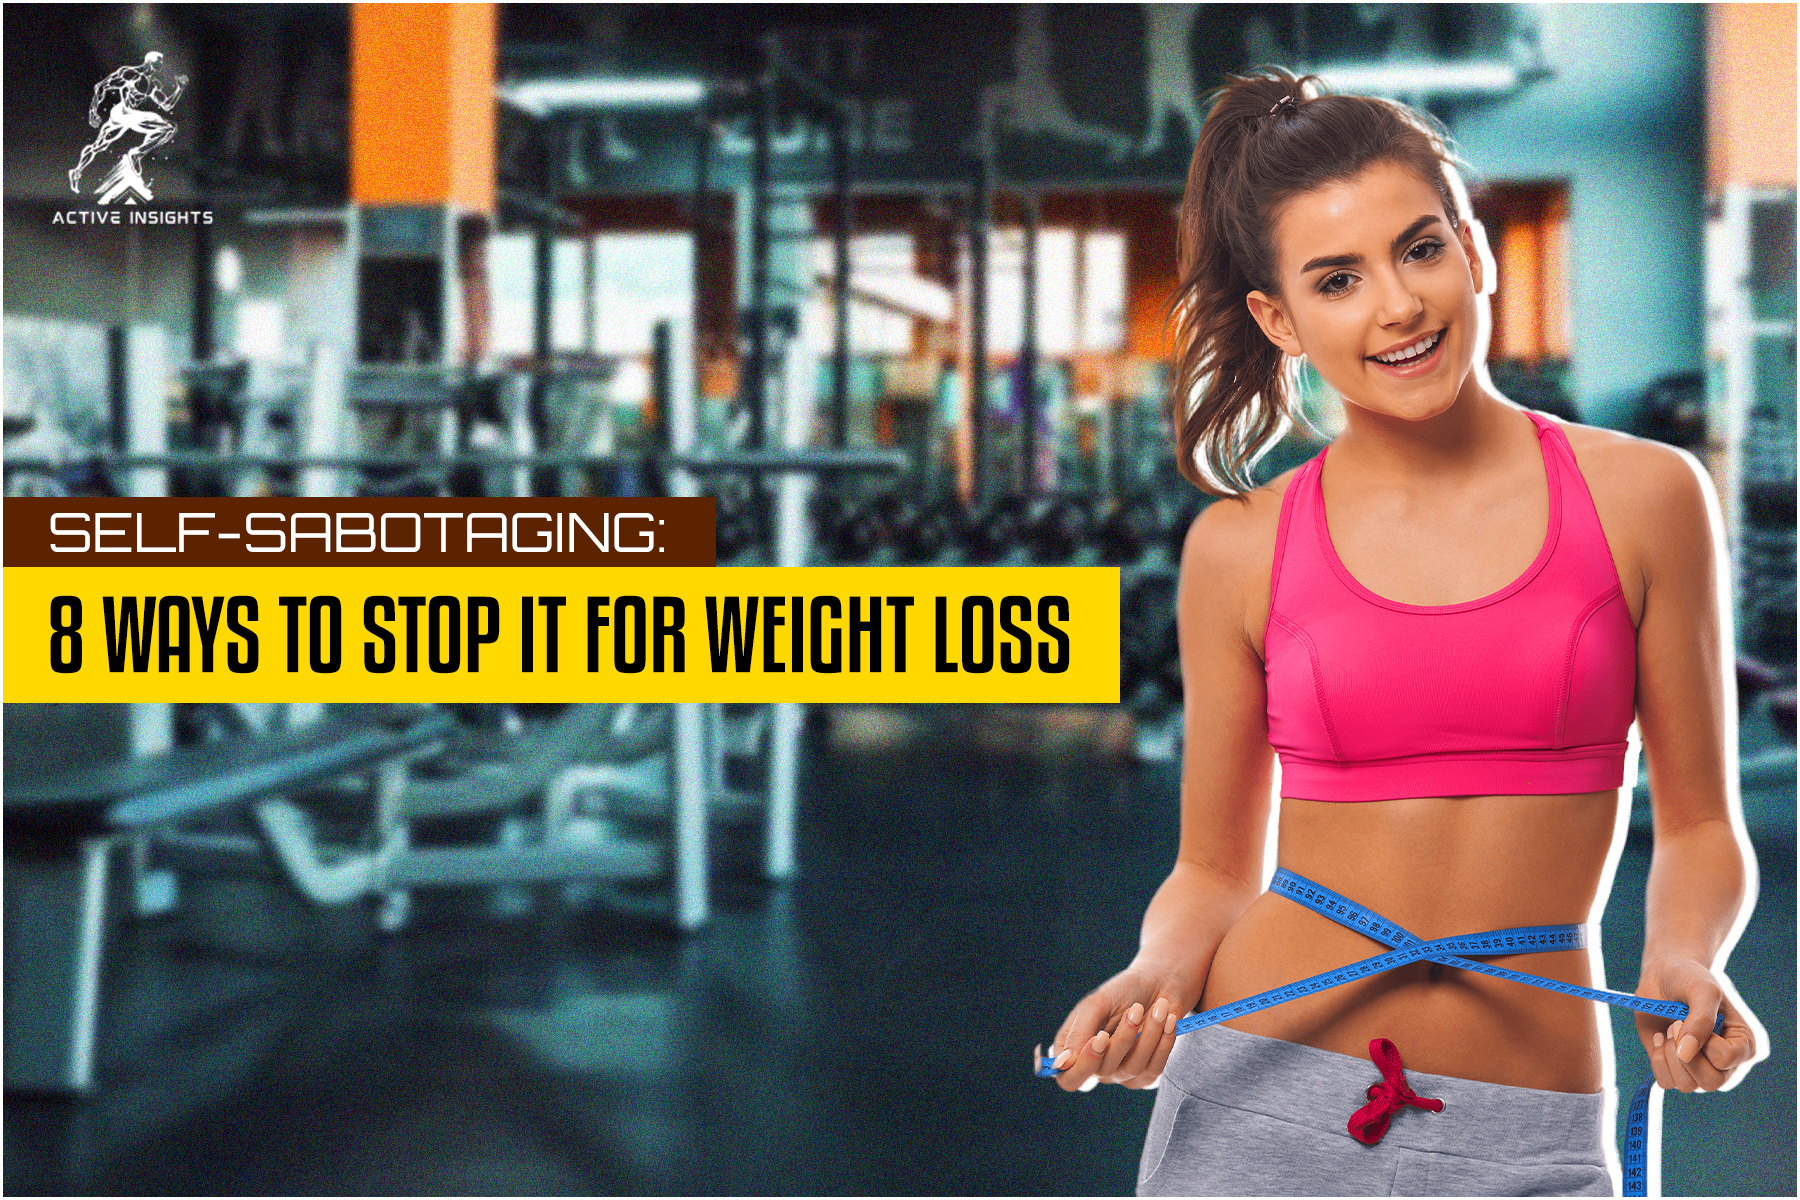 Self-Sabotaging - 8 Ways to Stop It for Weight Loss